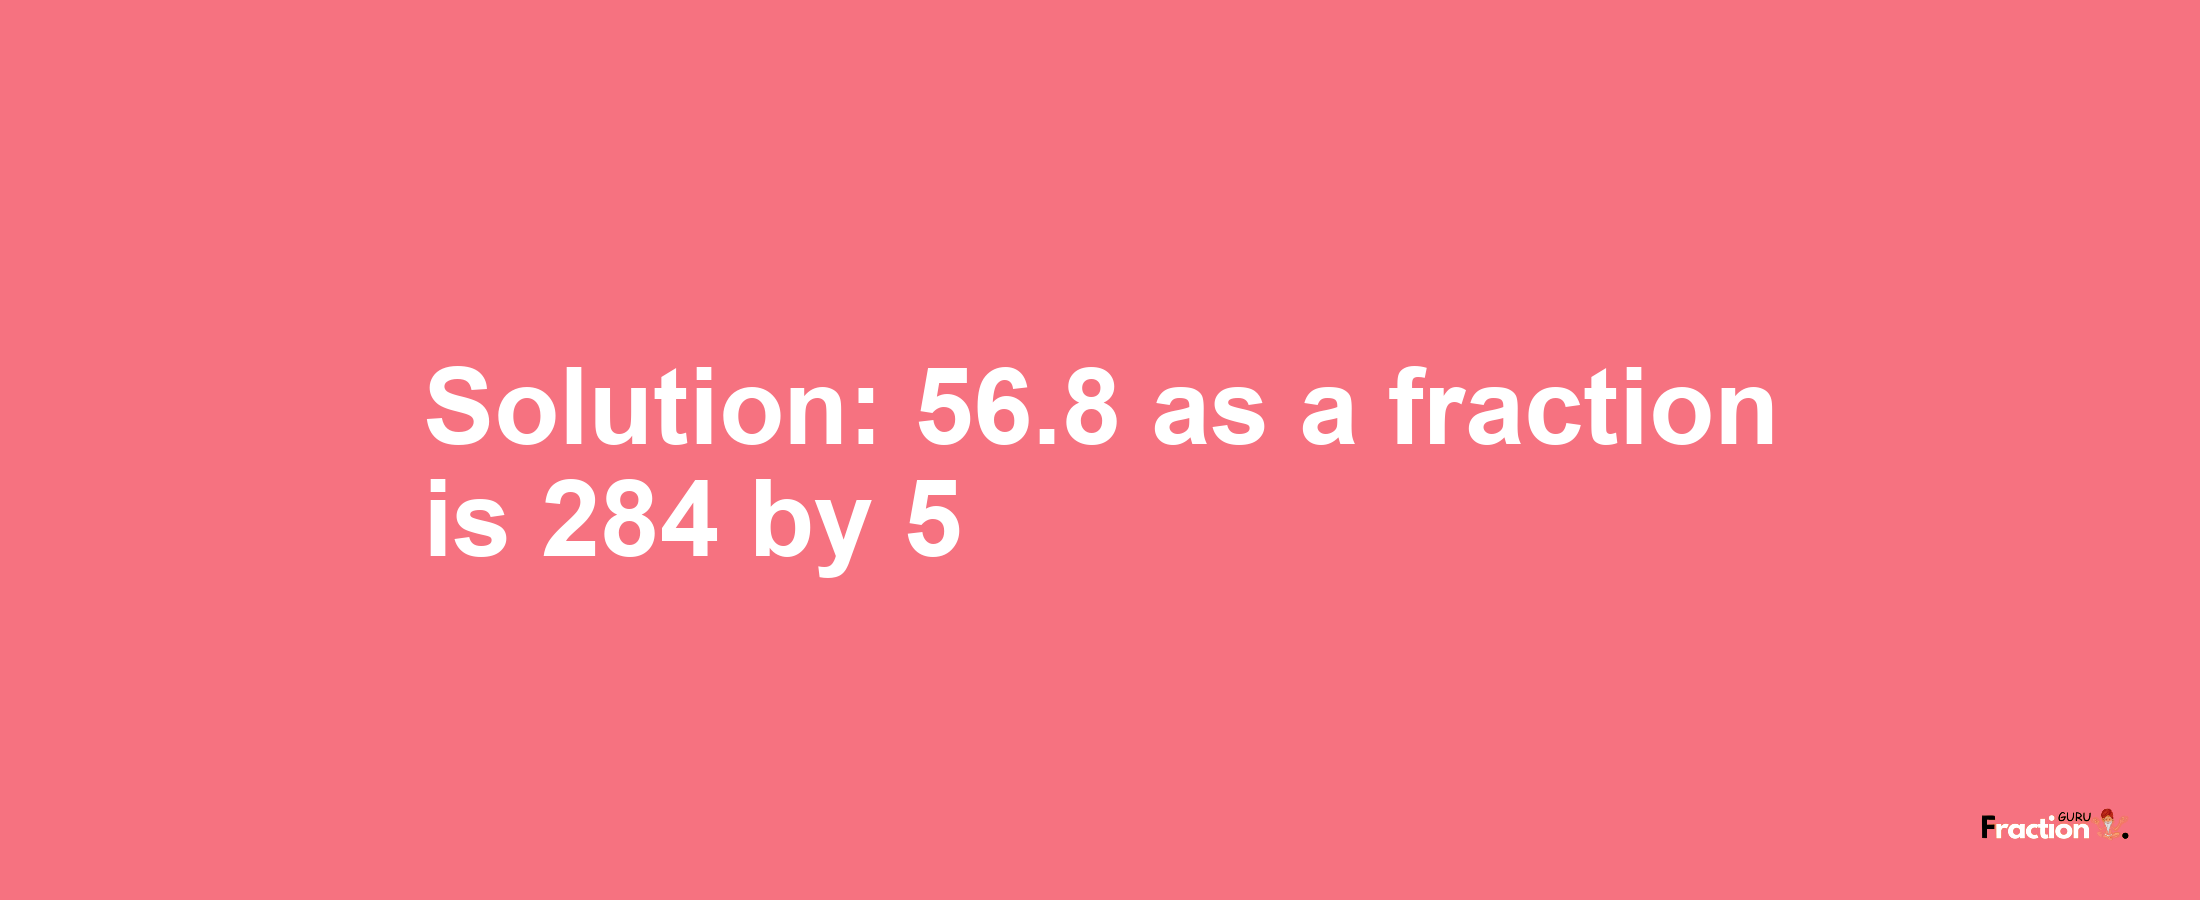 Solution:56.8 as a fraction is 284/5